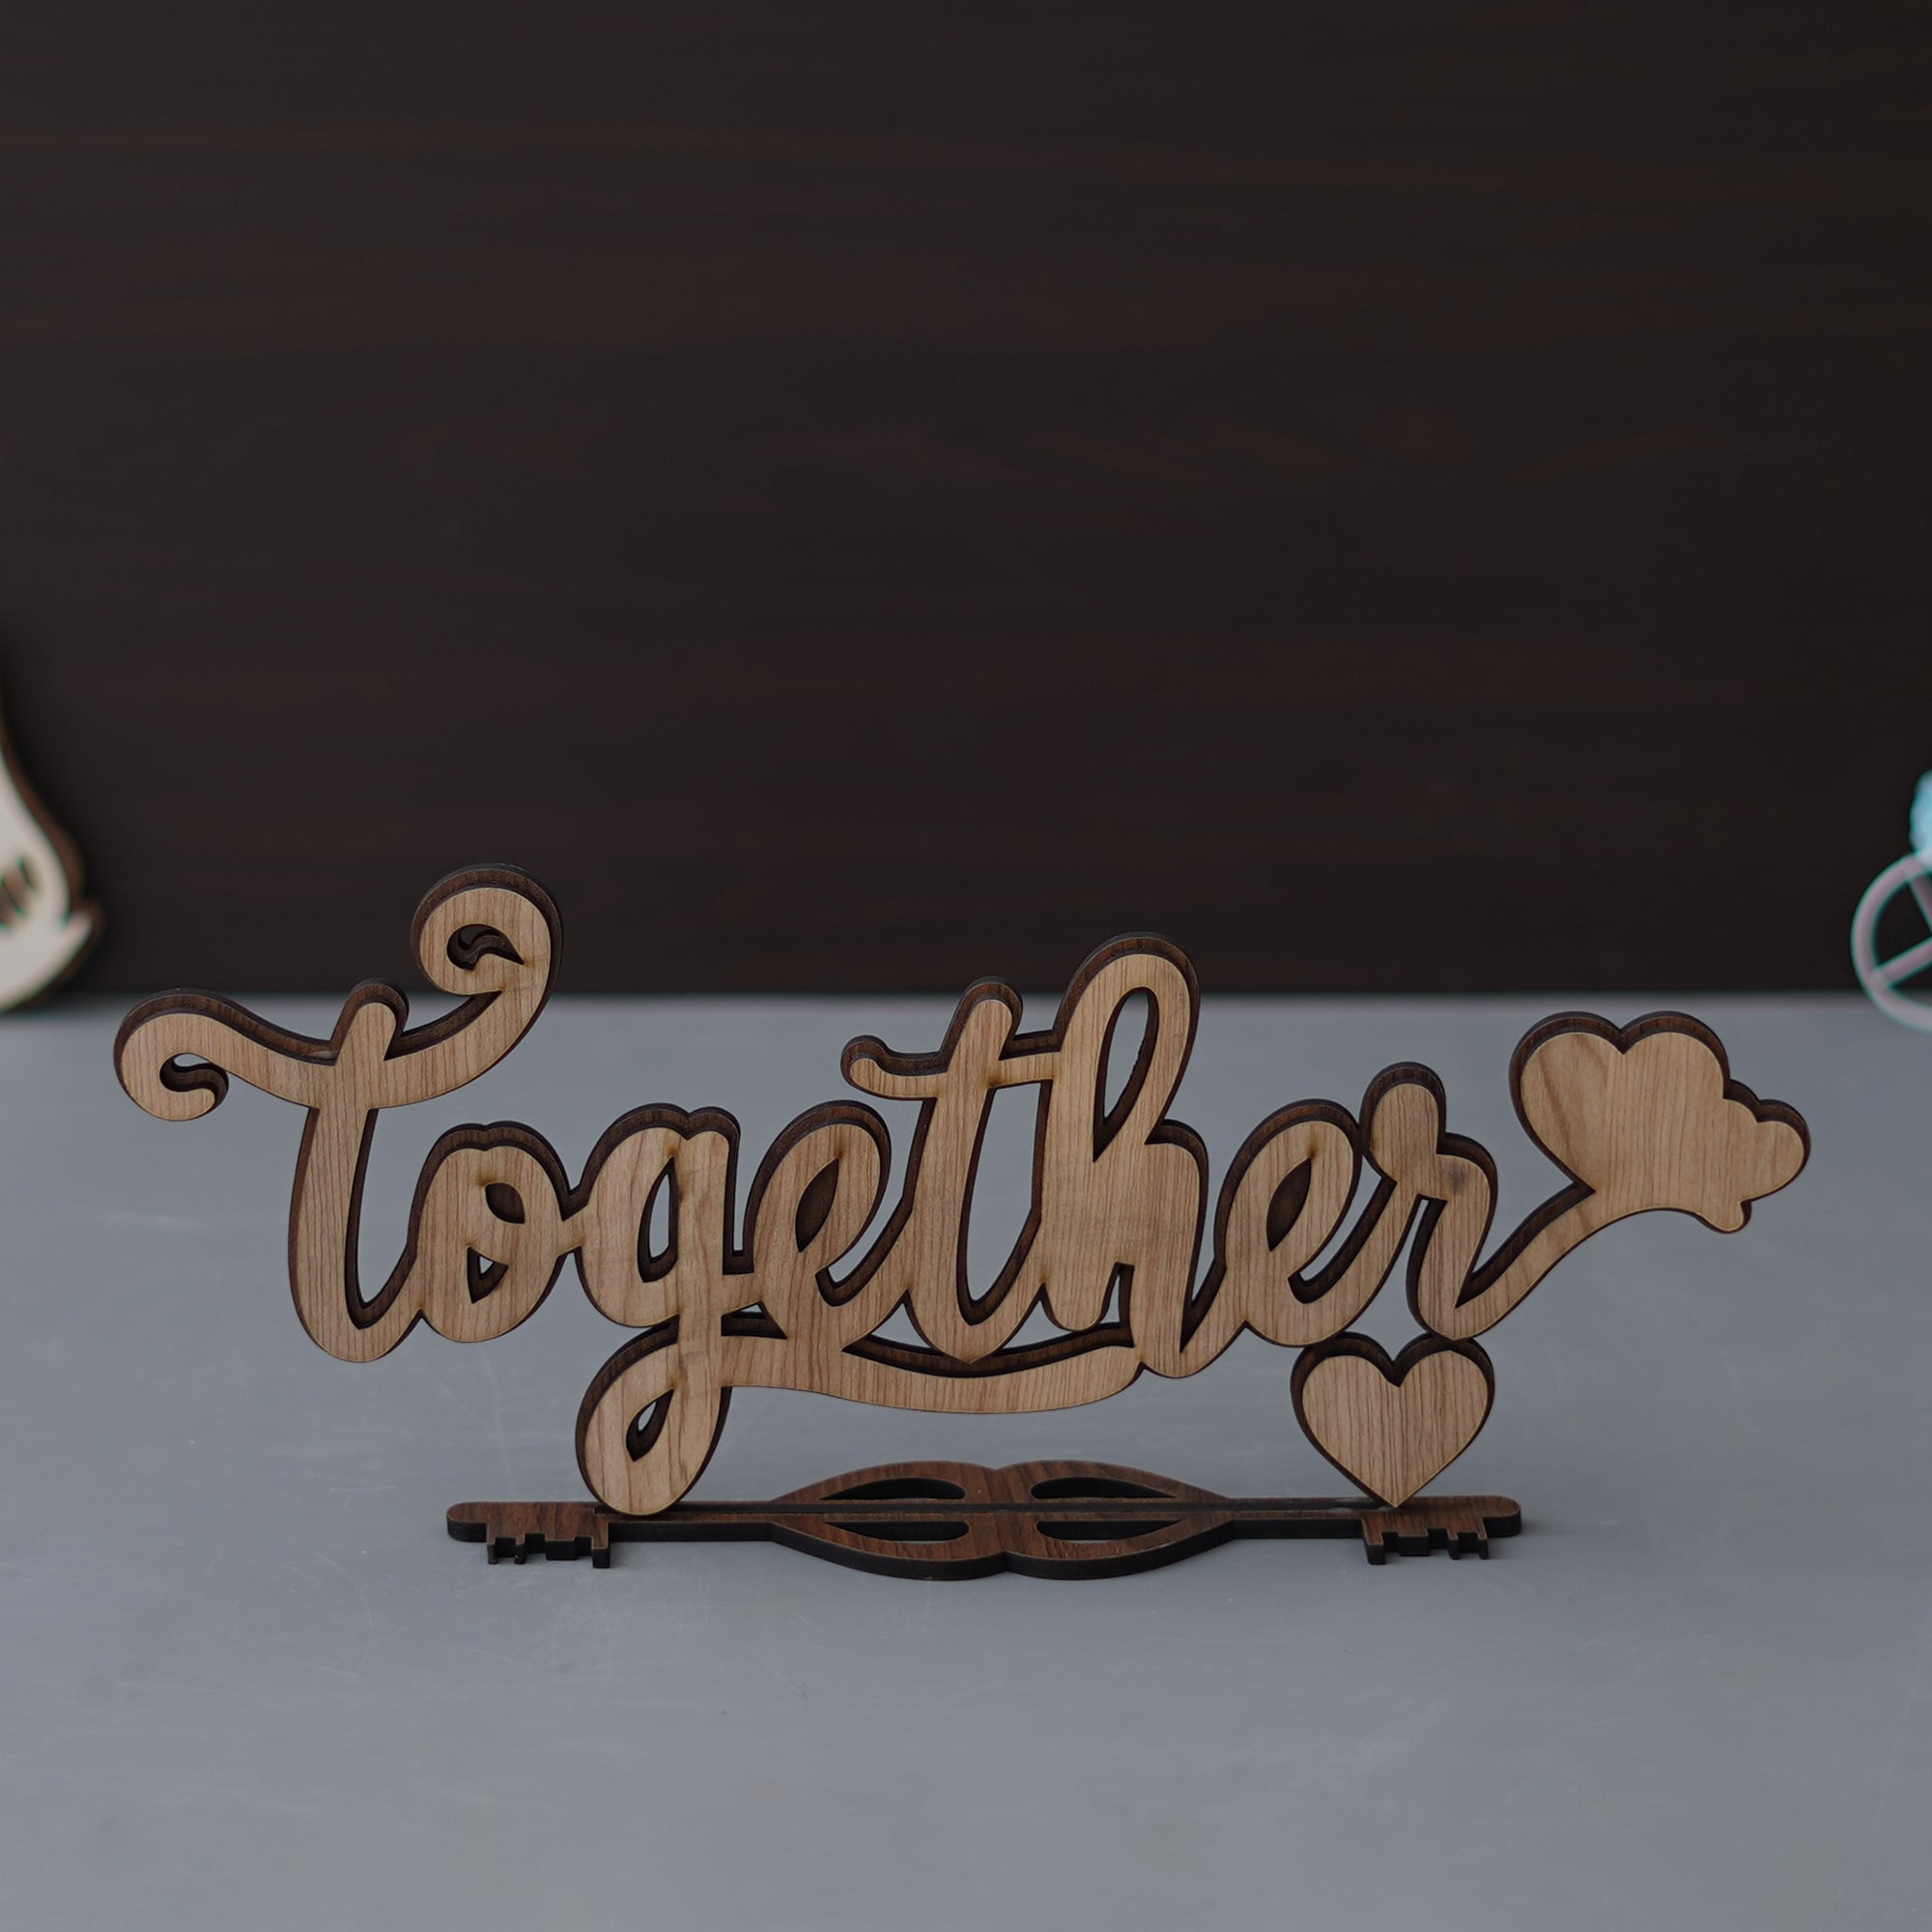 Valentine Combo of Pack of 8 Love Gift Cards, Golden Rose Gift Set, "Together" Brown Wooden Puzzle Showpiece With Stand 5